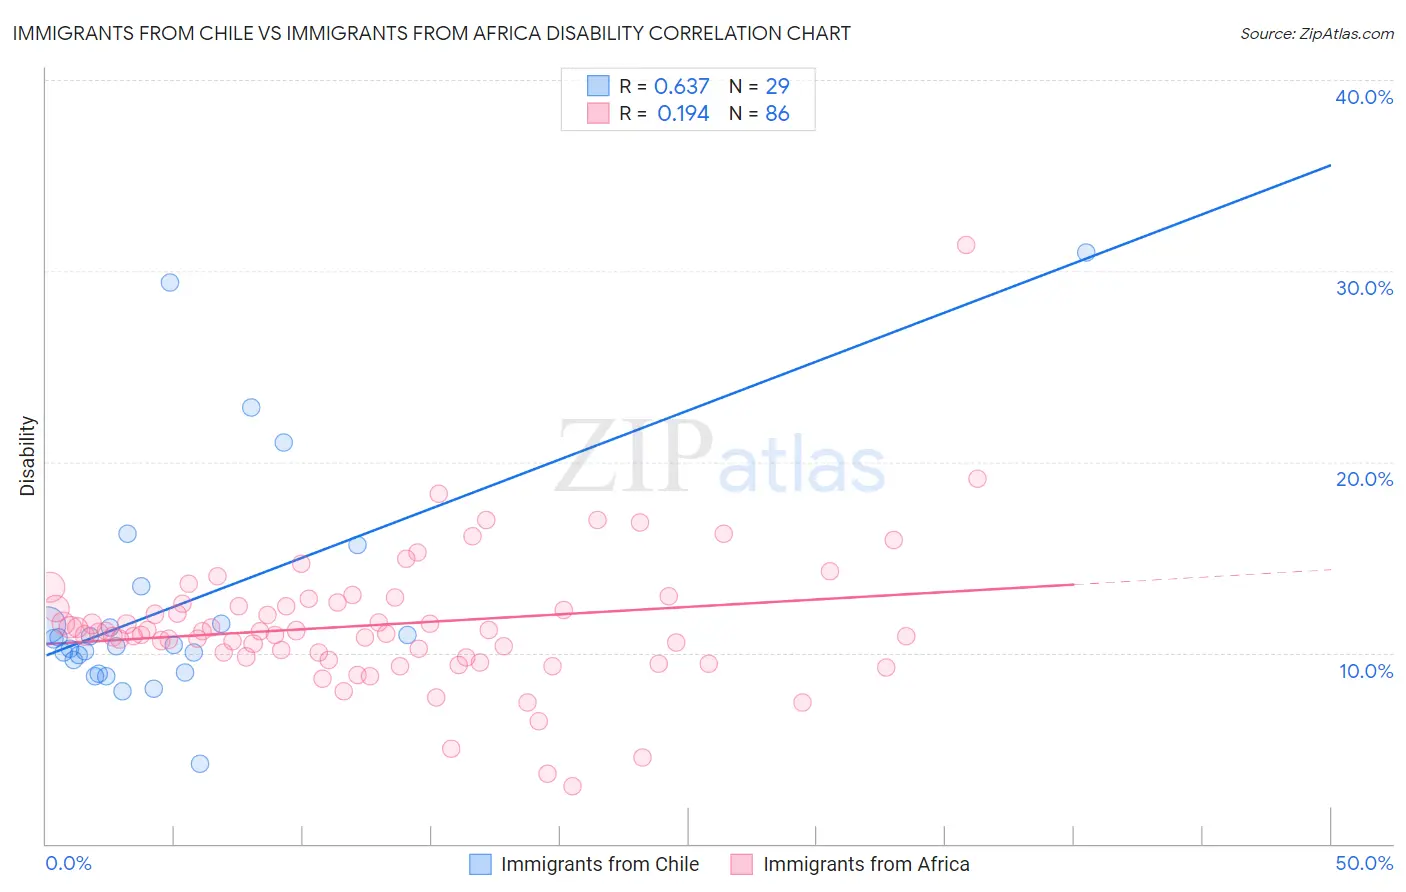 Immigrants from Chile vs Immigrants from Africa Disability